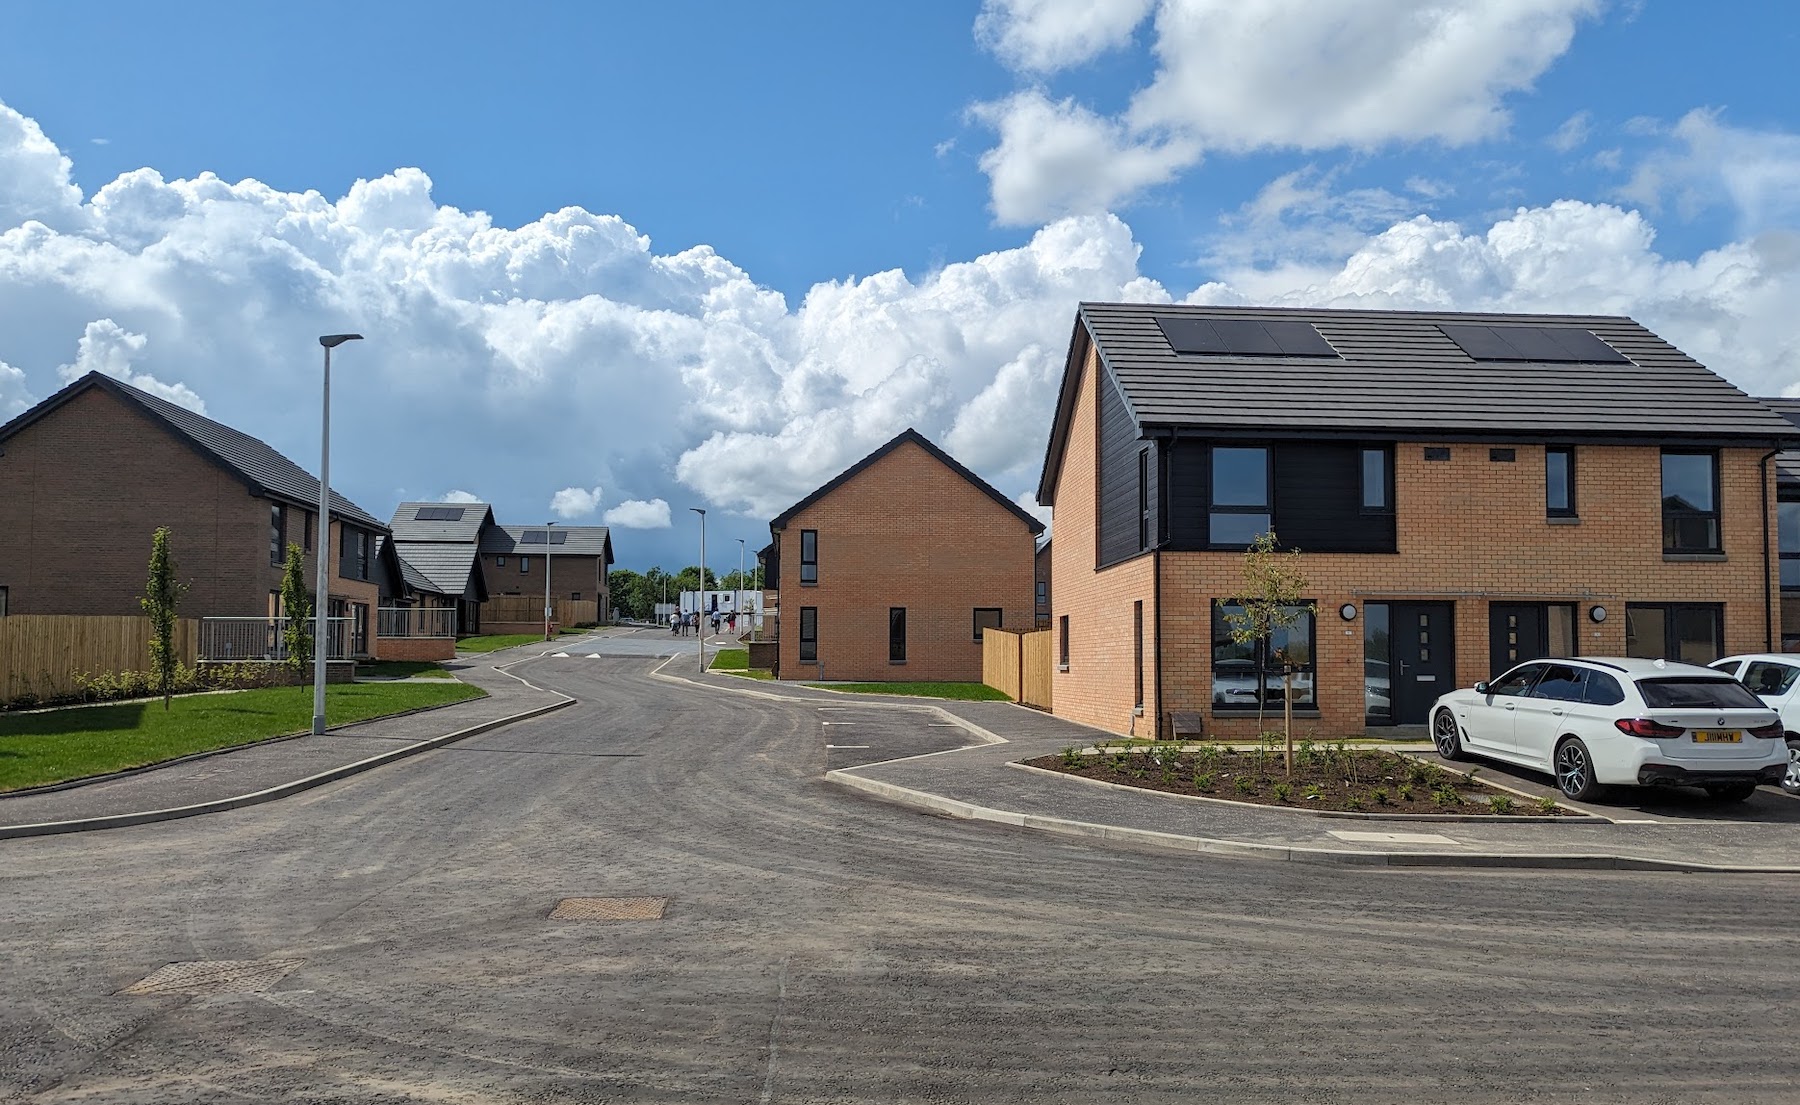 JR Group completes new sustainable development in Kirkcaldy